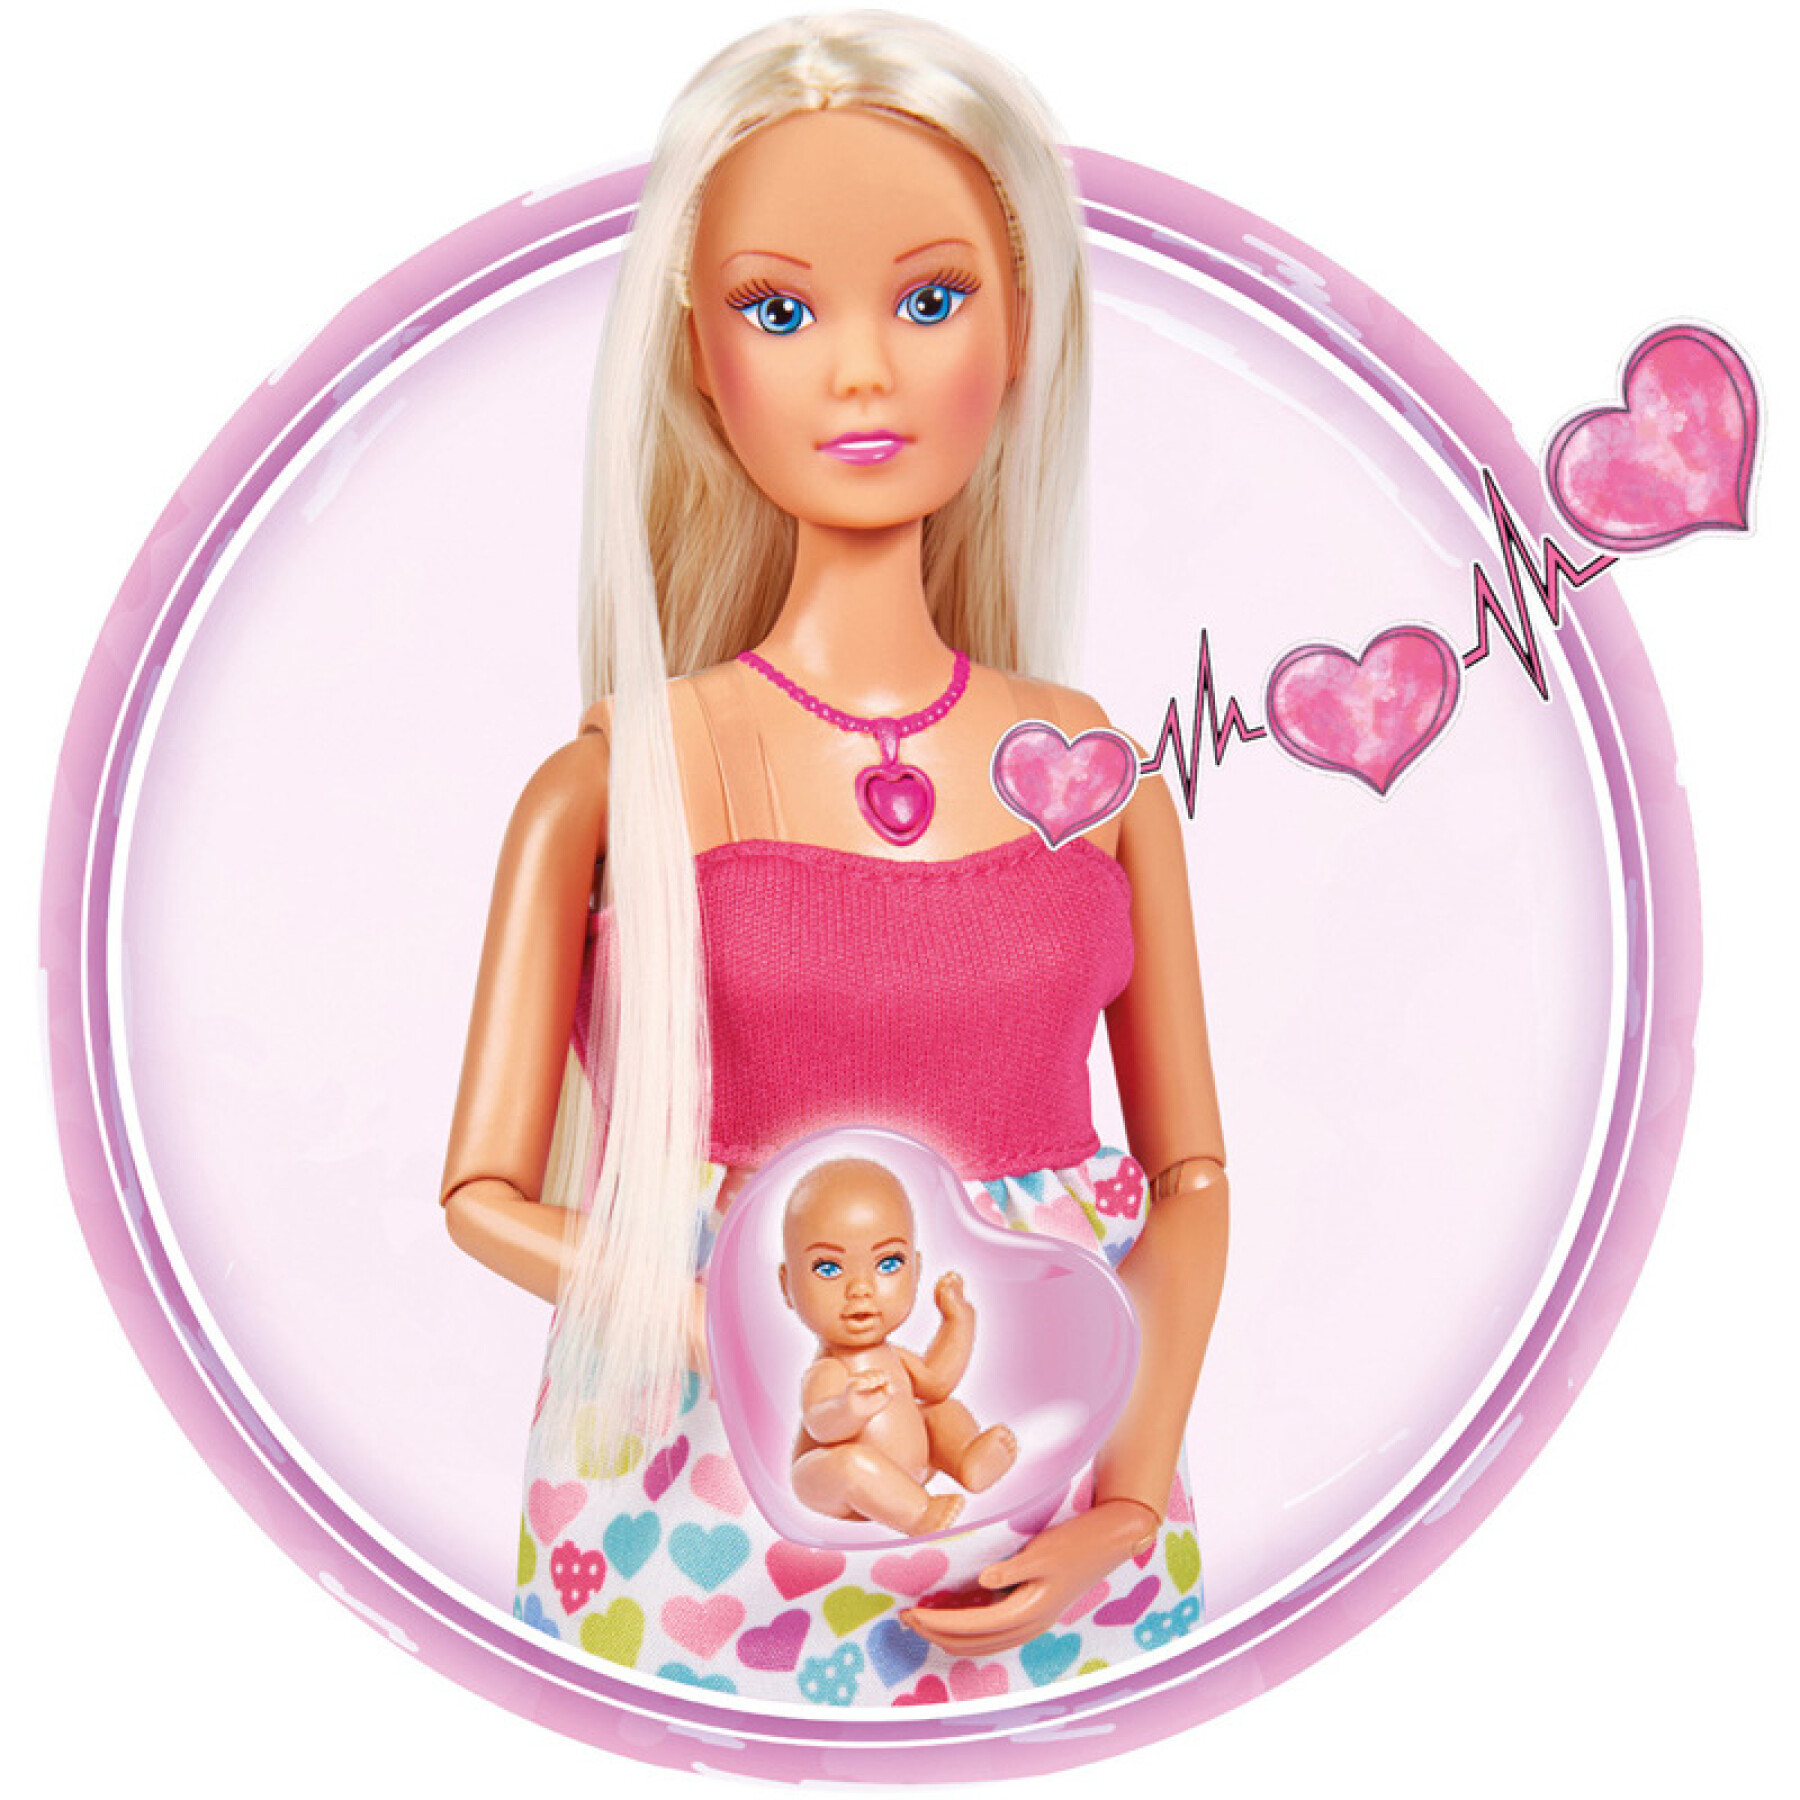 Doll Smoby Steffi Love Tendre Maman